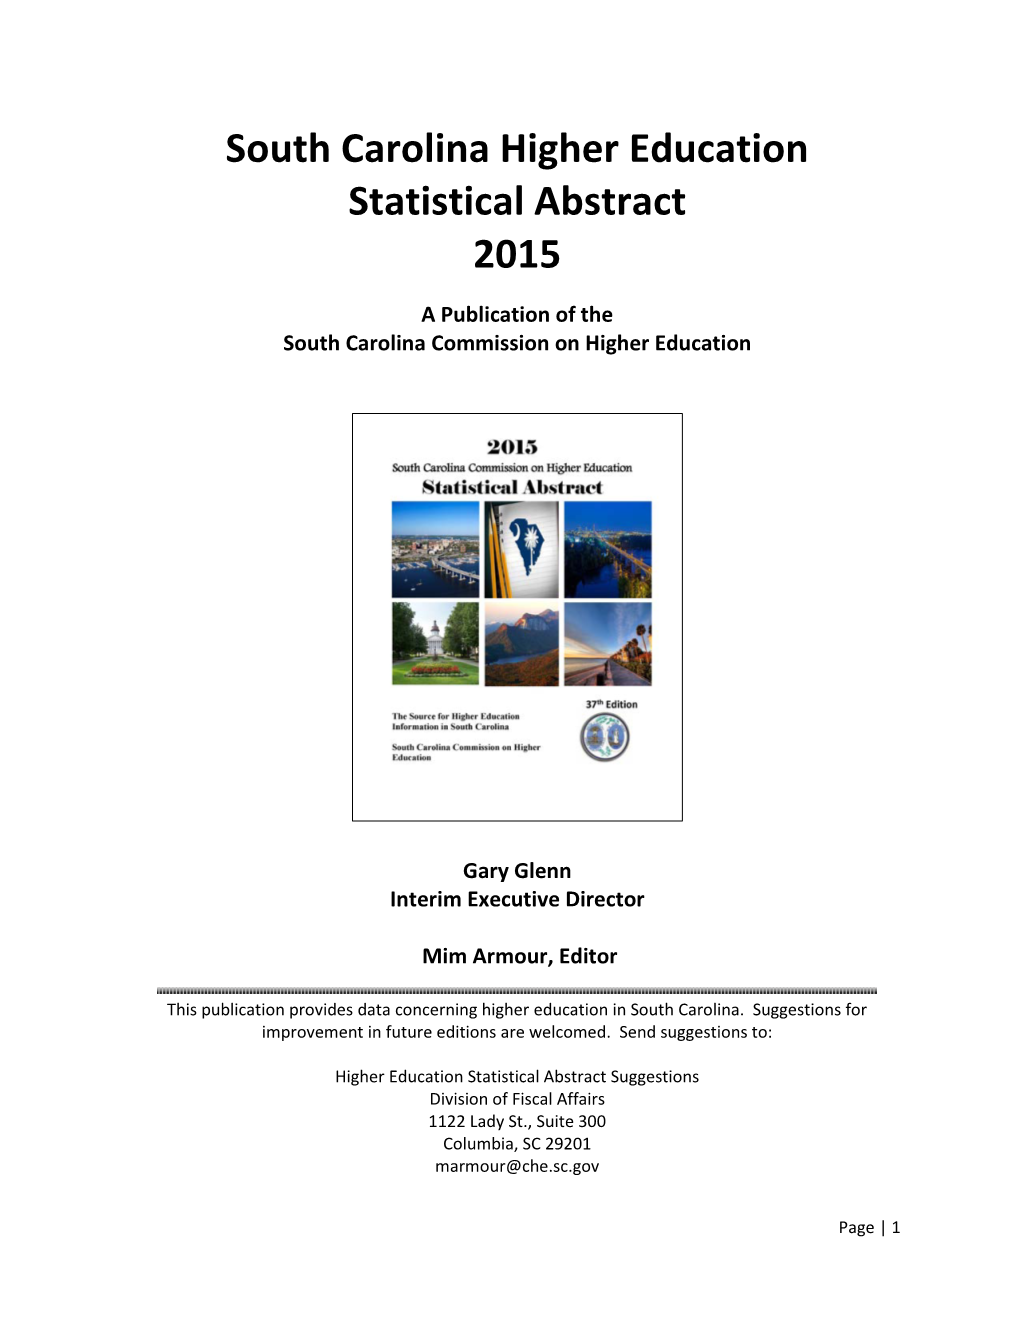 South Carolina Higher Education Statistical Abstract 2015